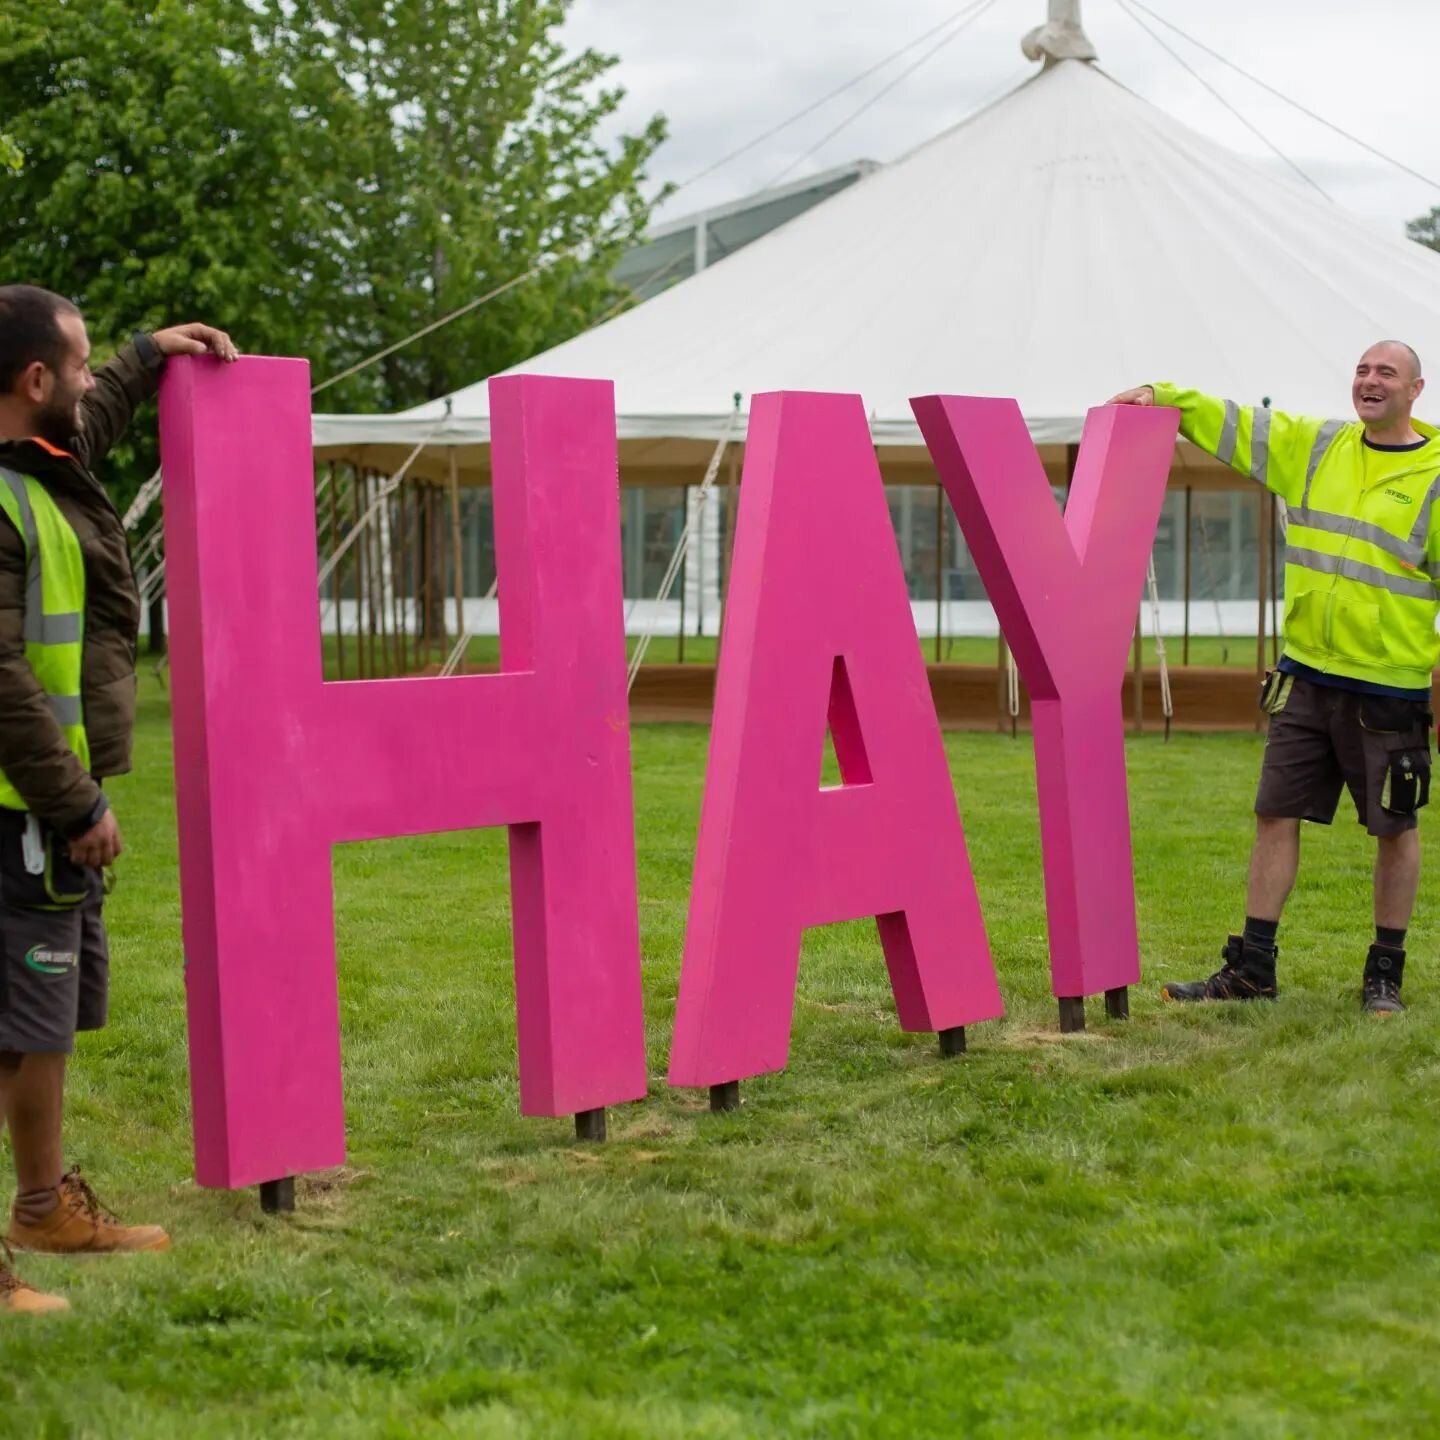 Shout-out to ALL our generous supporters, and a special spotlight on Hay Festival @hayfestival this morning. They've championed Hay Pride since it was the speck of an idea 

Hay Festival begins THIS WEEK! It's gonna to be HUGE! 

And we're excited an